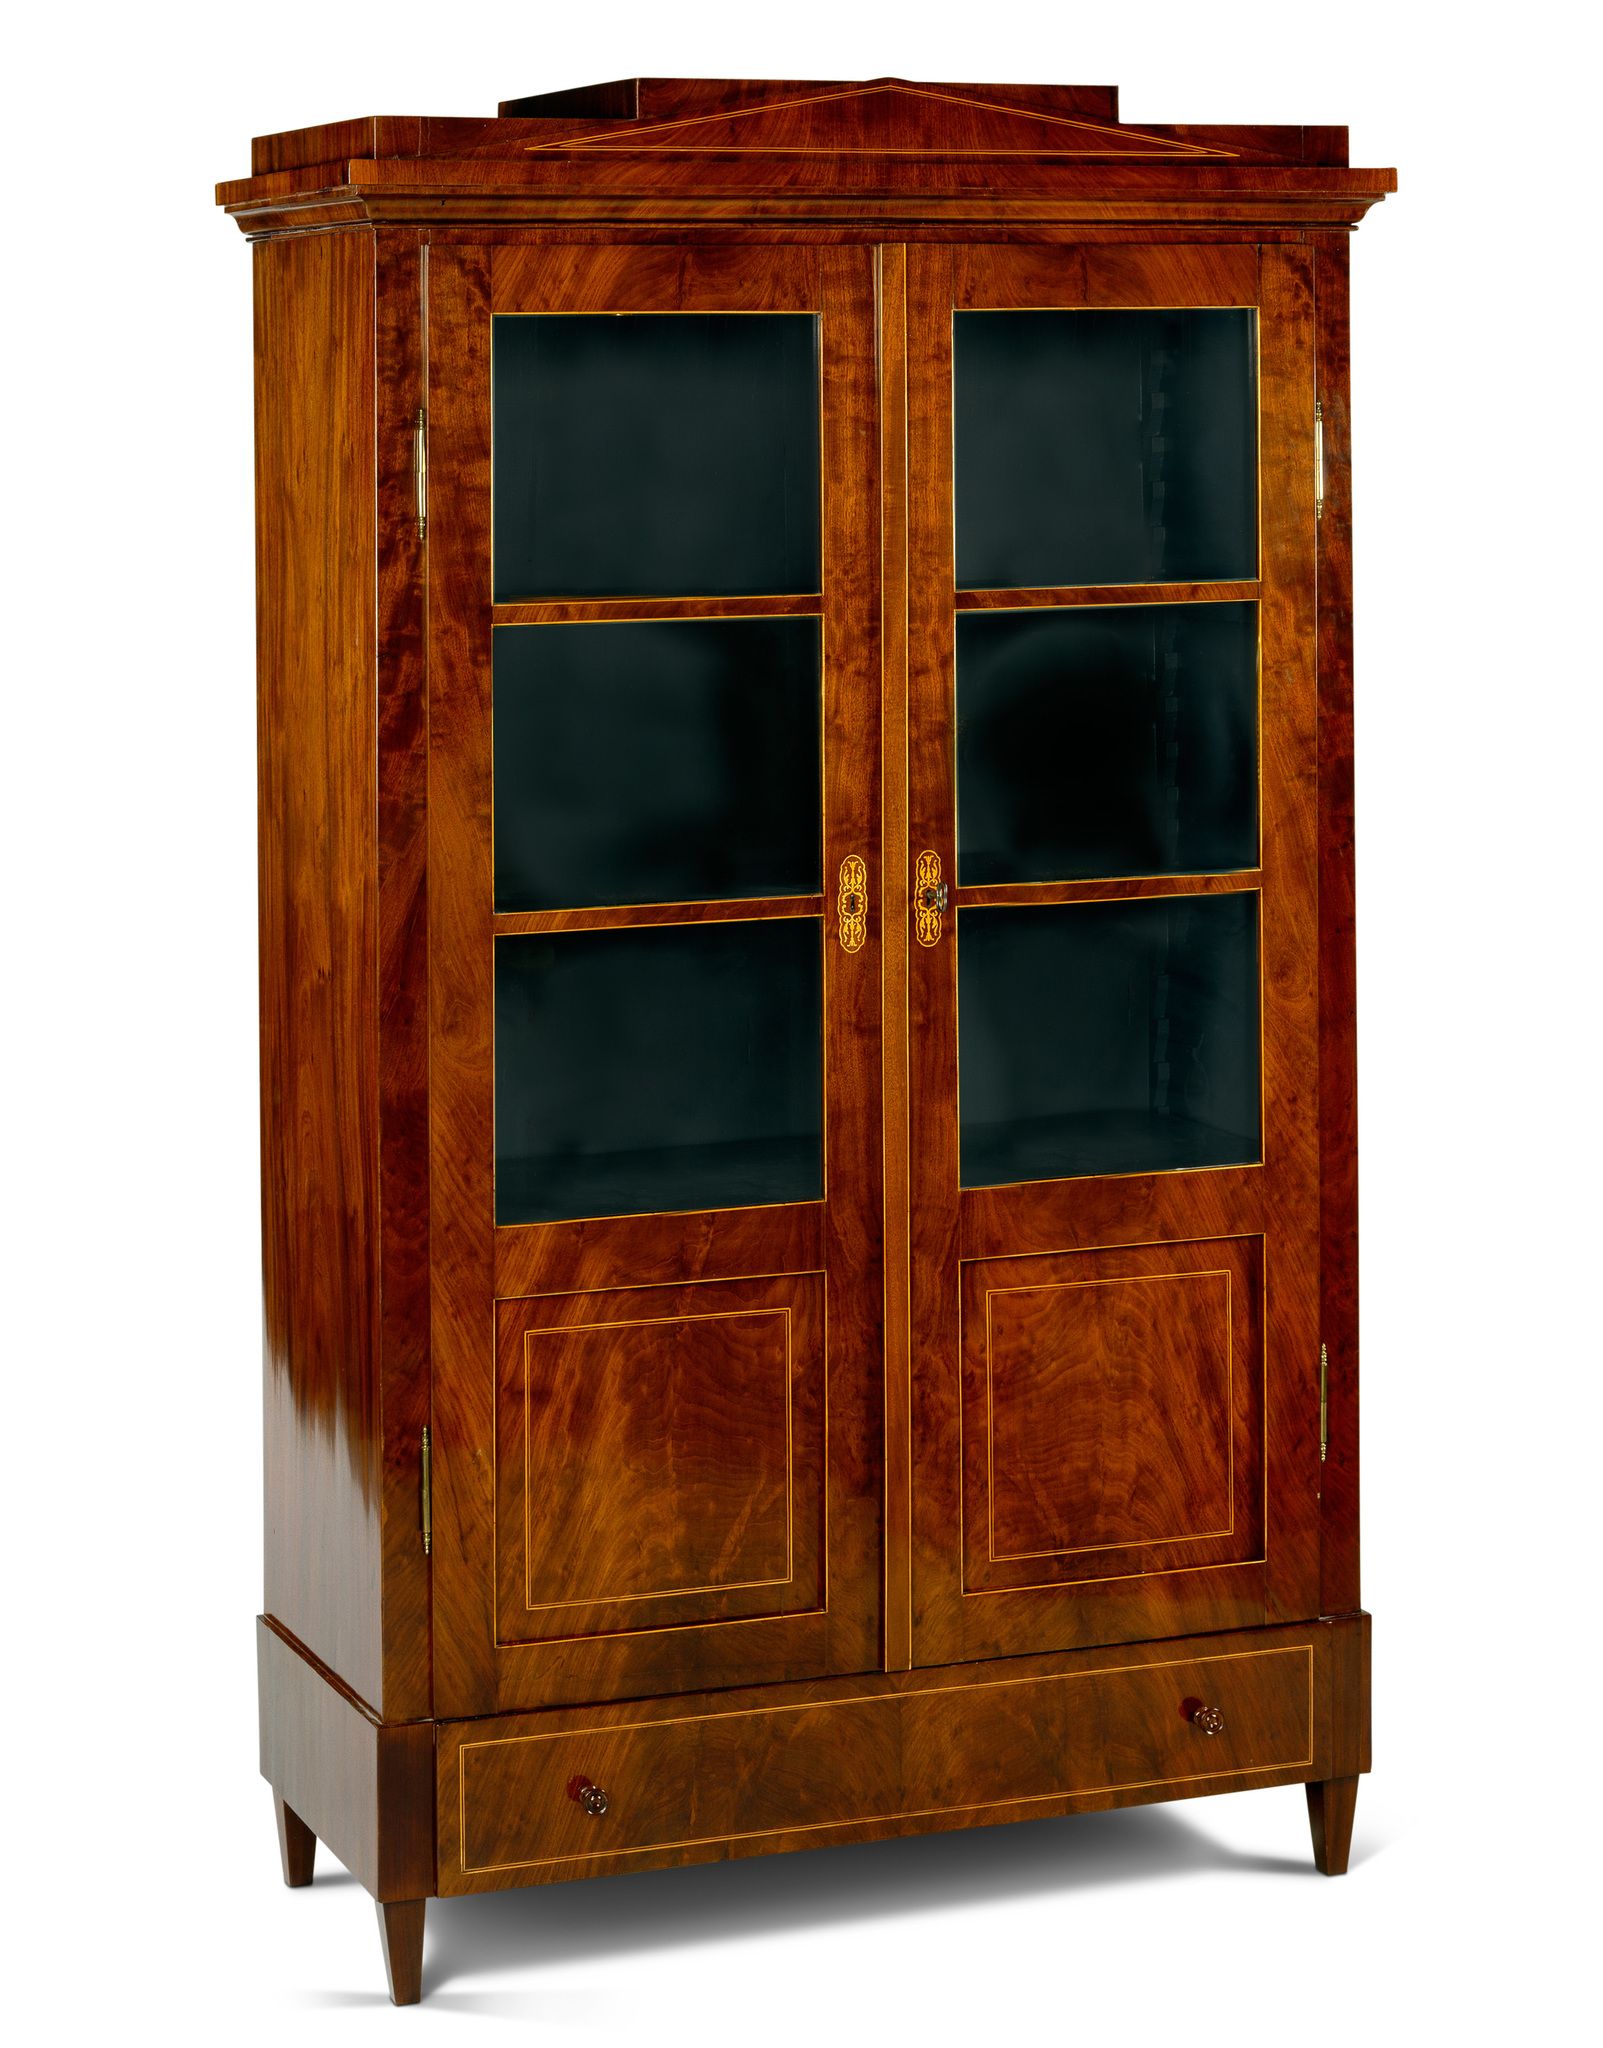 A Berlin Mahogany Armoire Germany circa 1825, having a stepped pediment inlaid with boxwood